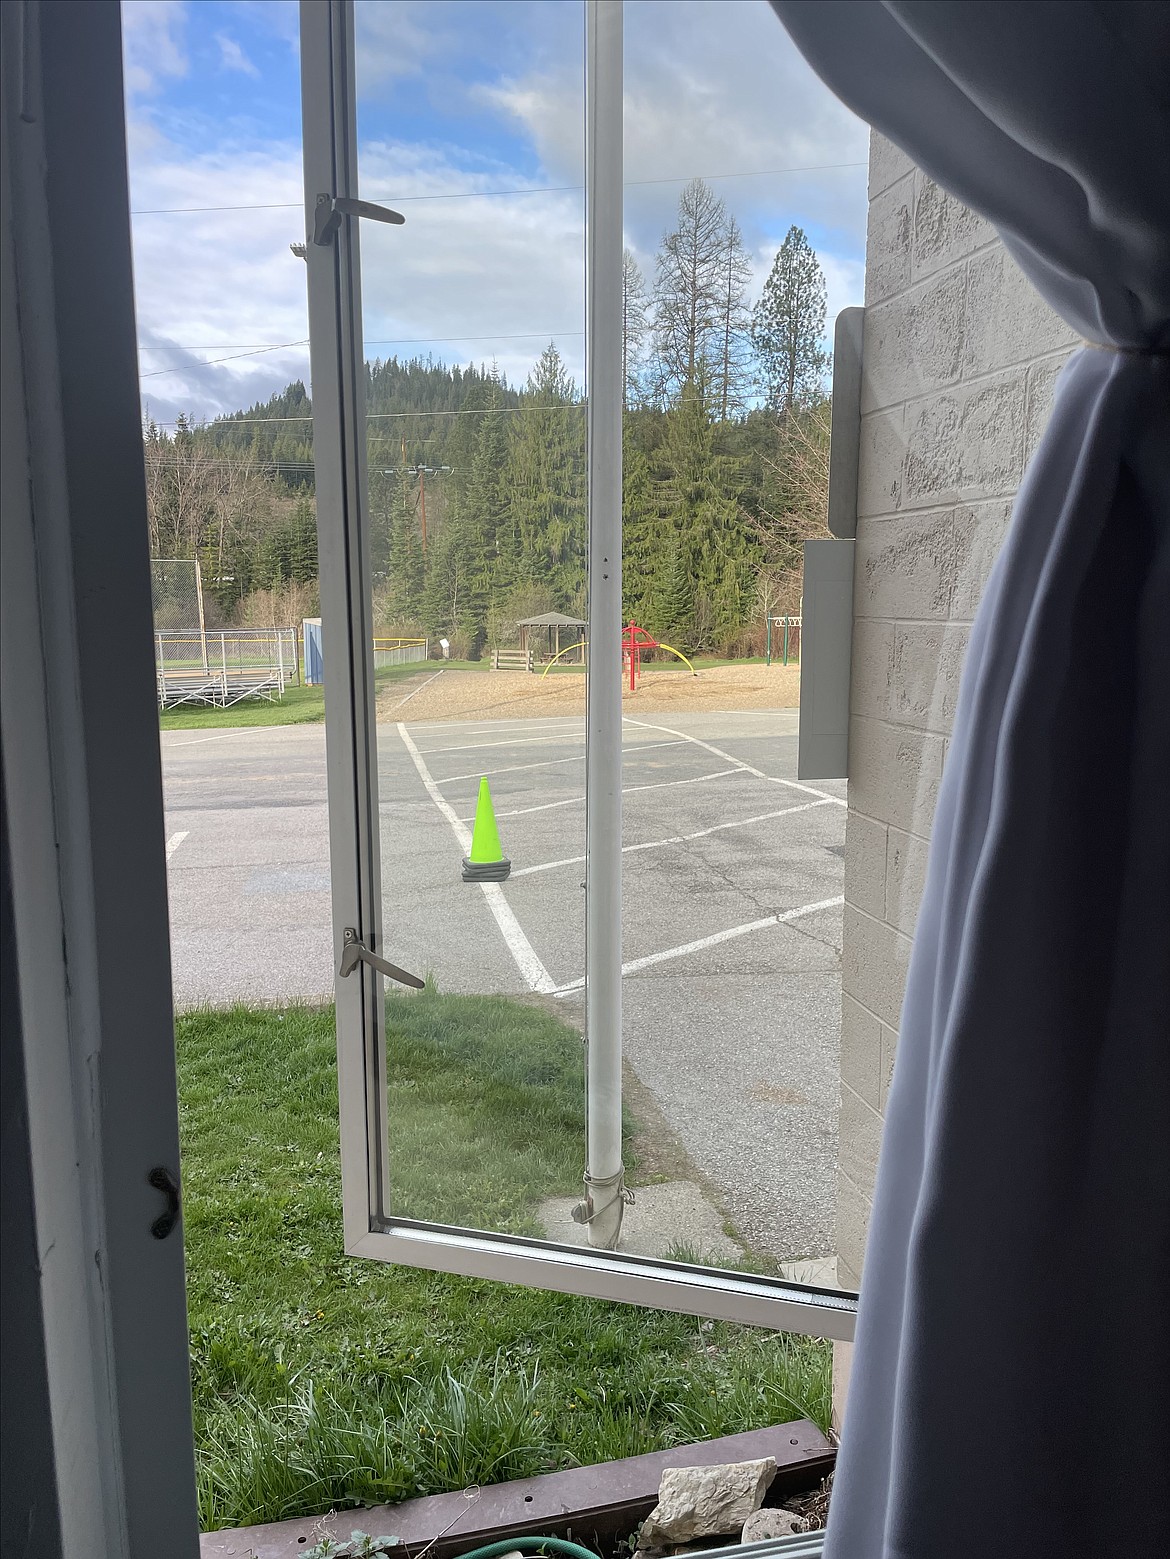 Thanks to grants through the Office of Safety and Security, Canyon Elementary School received several important safety escape windows have been added to every ground floor classroom.